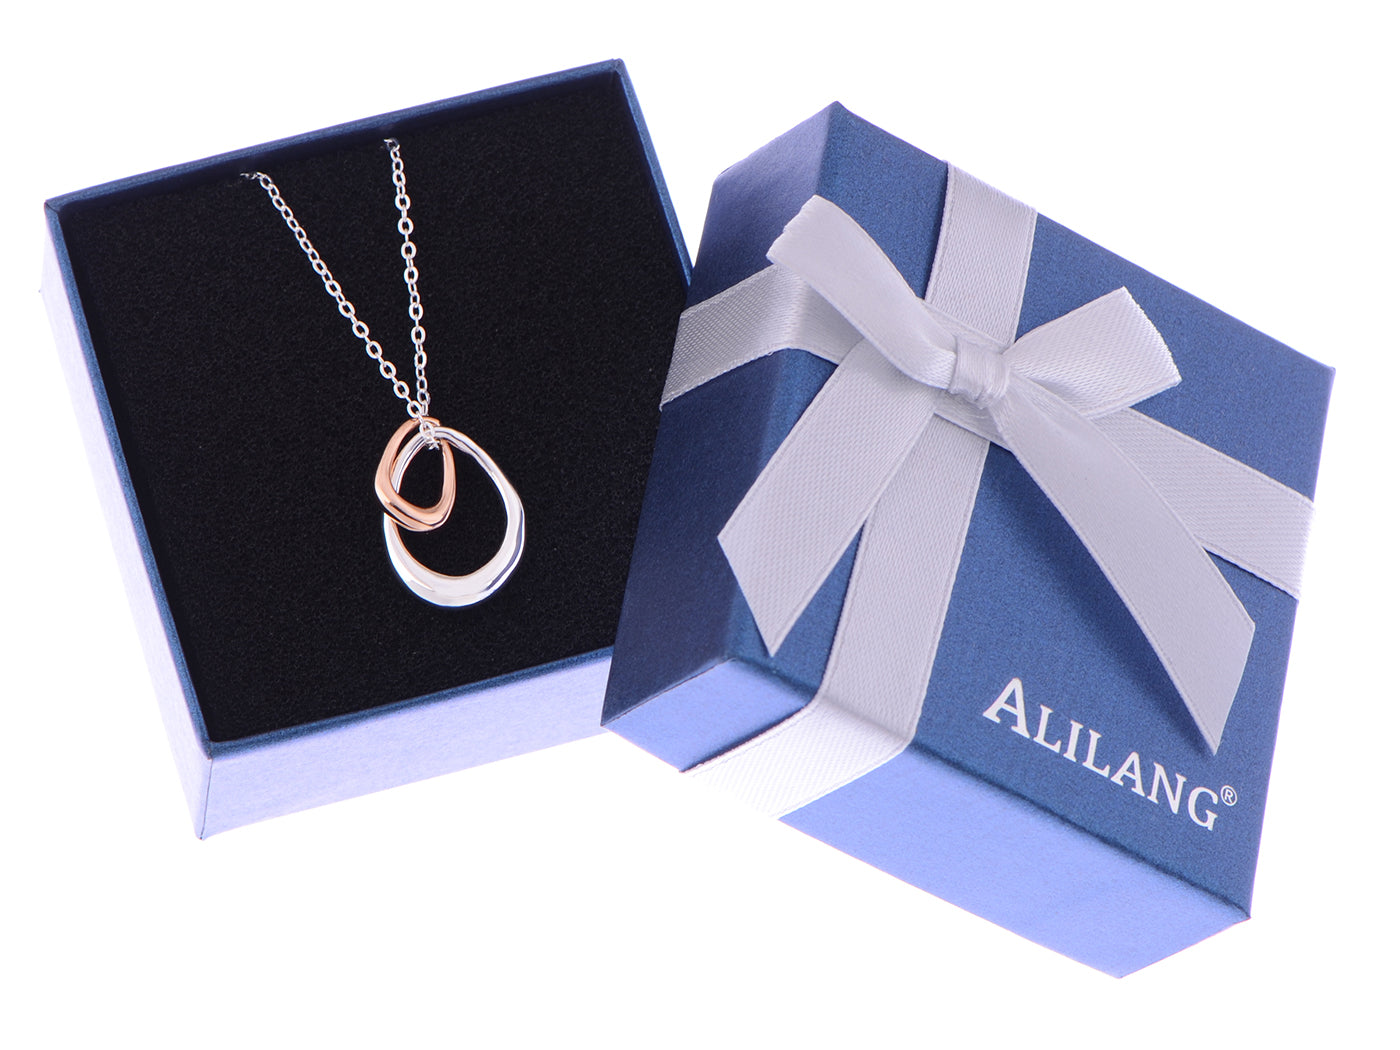 Alilang Stainless Steel Interlocking Double Circle Chain Link Pendant Necklace Jewelry for Girls and Women